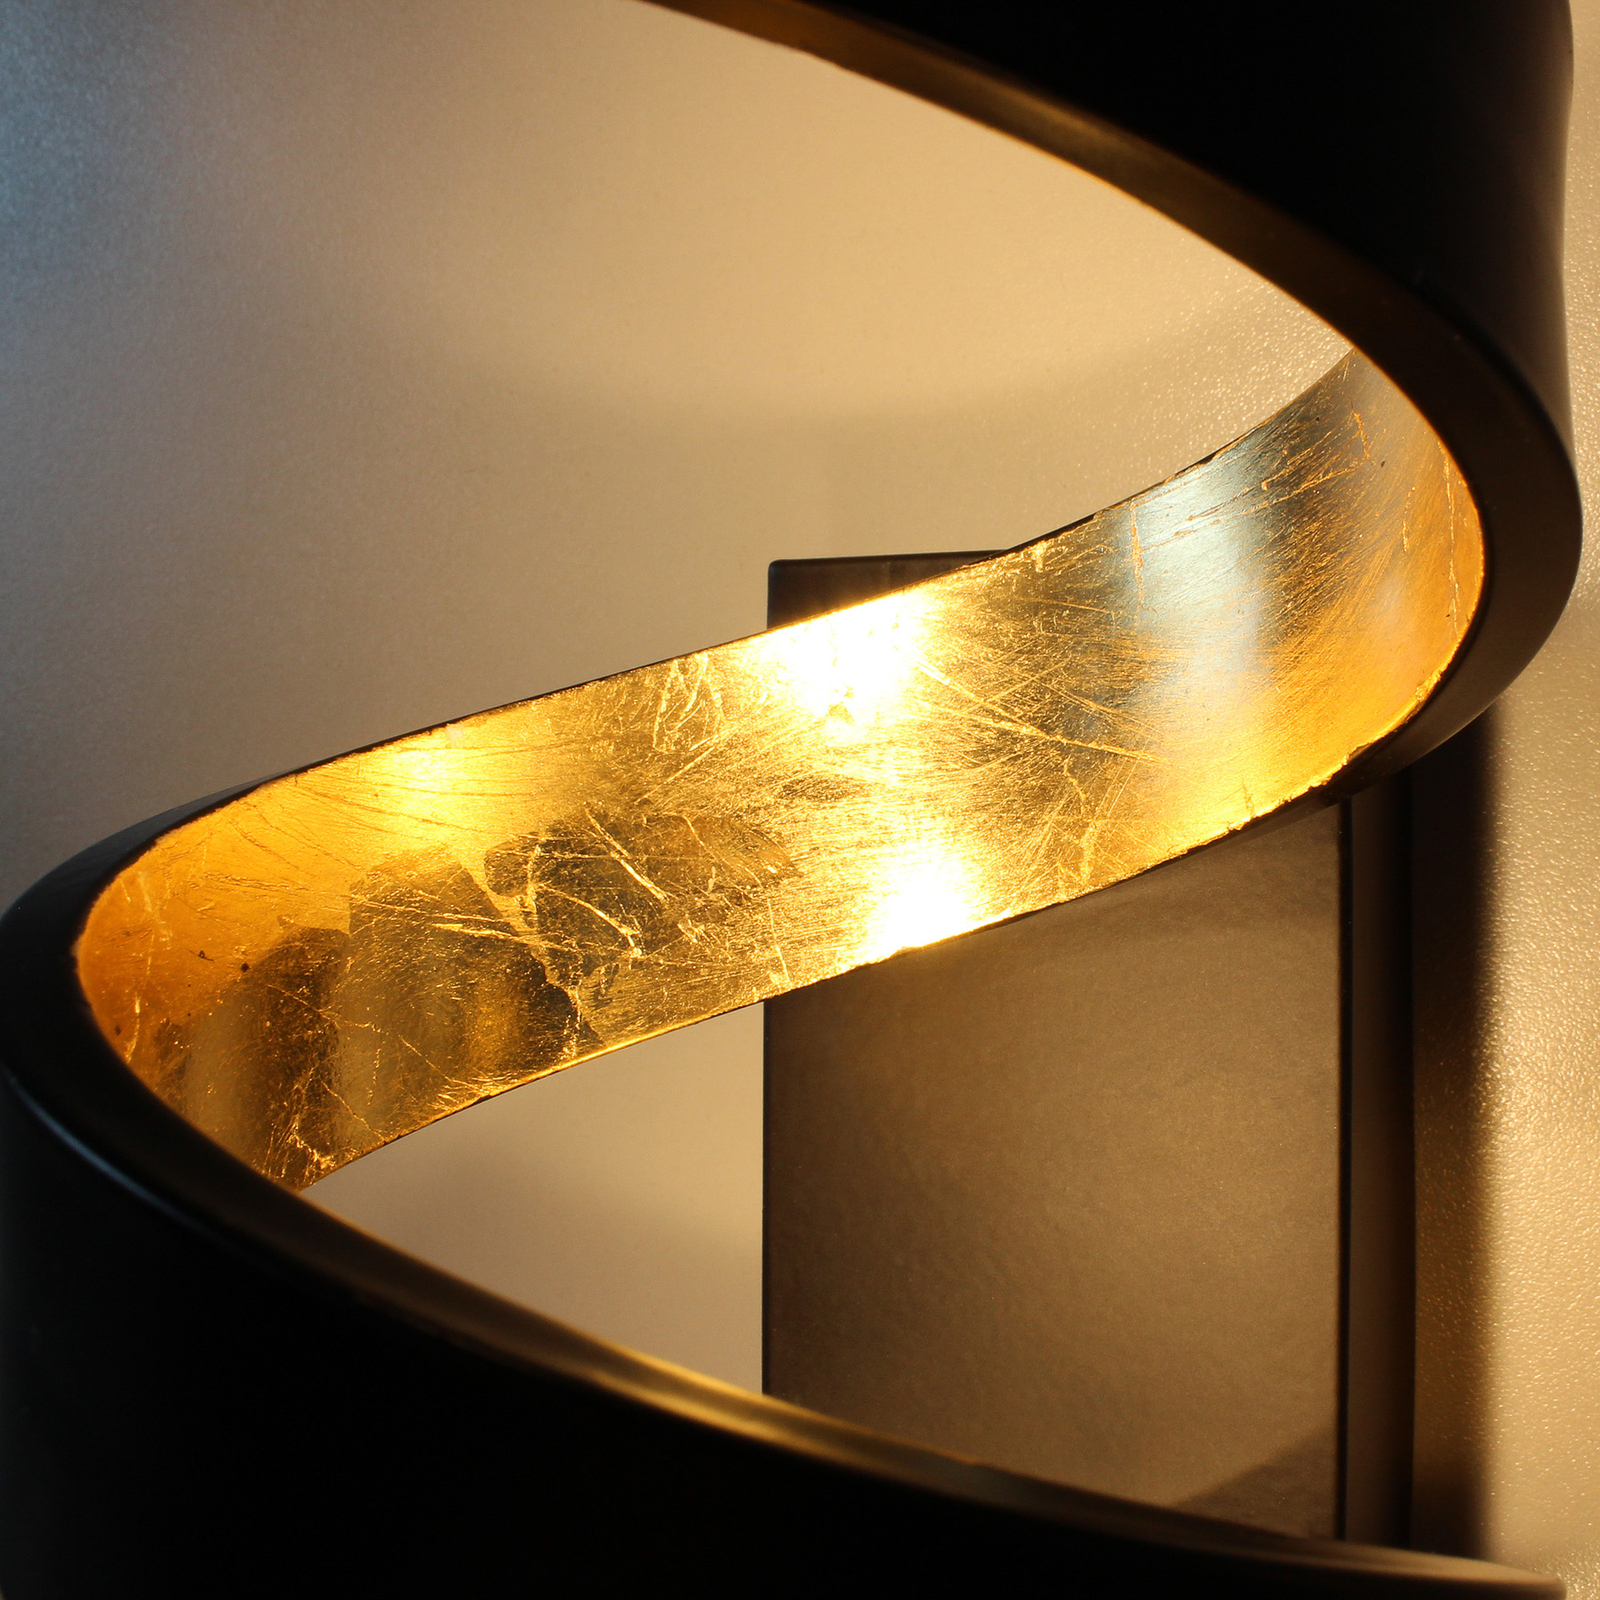 Helix LED ceiling light in black and gold